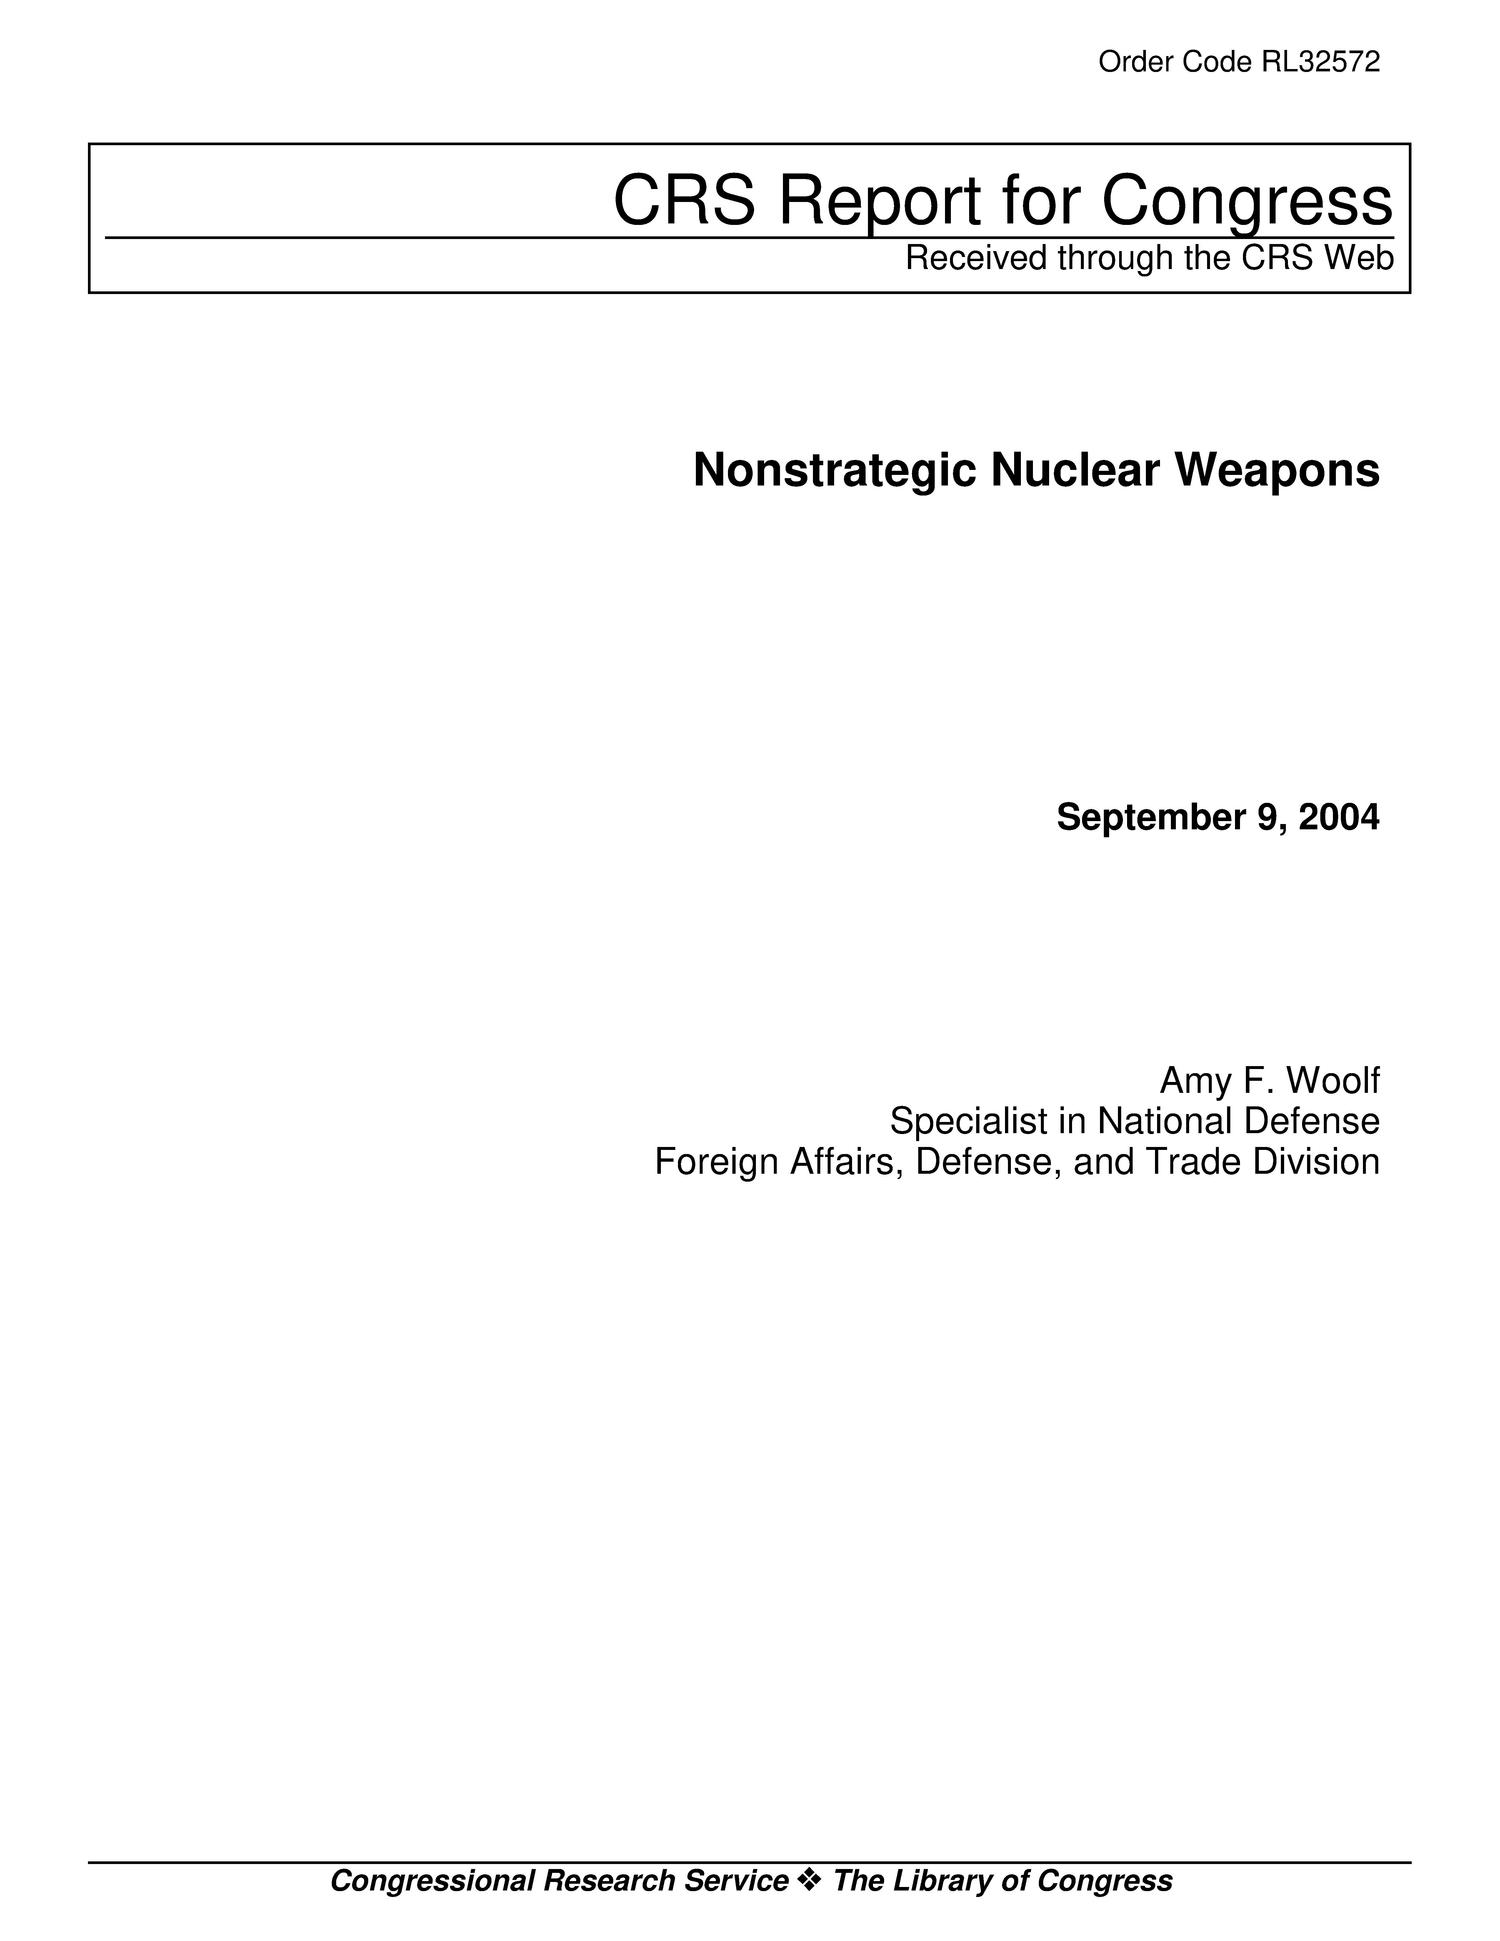 Nonstrategic Nuclear Weapons
                                                
                                                    [Sequence #]: 1 of 29
                                                